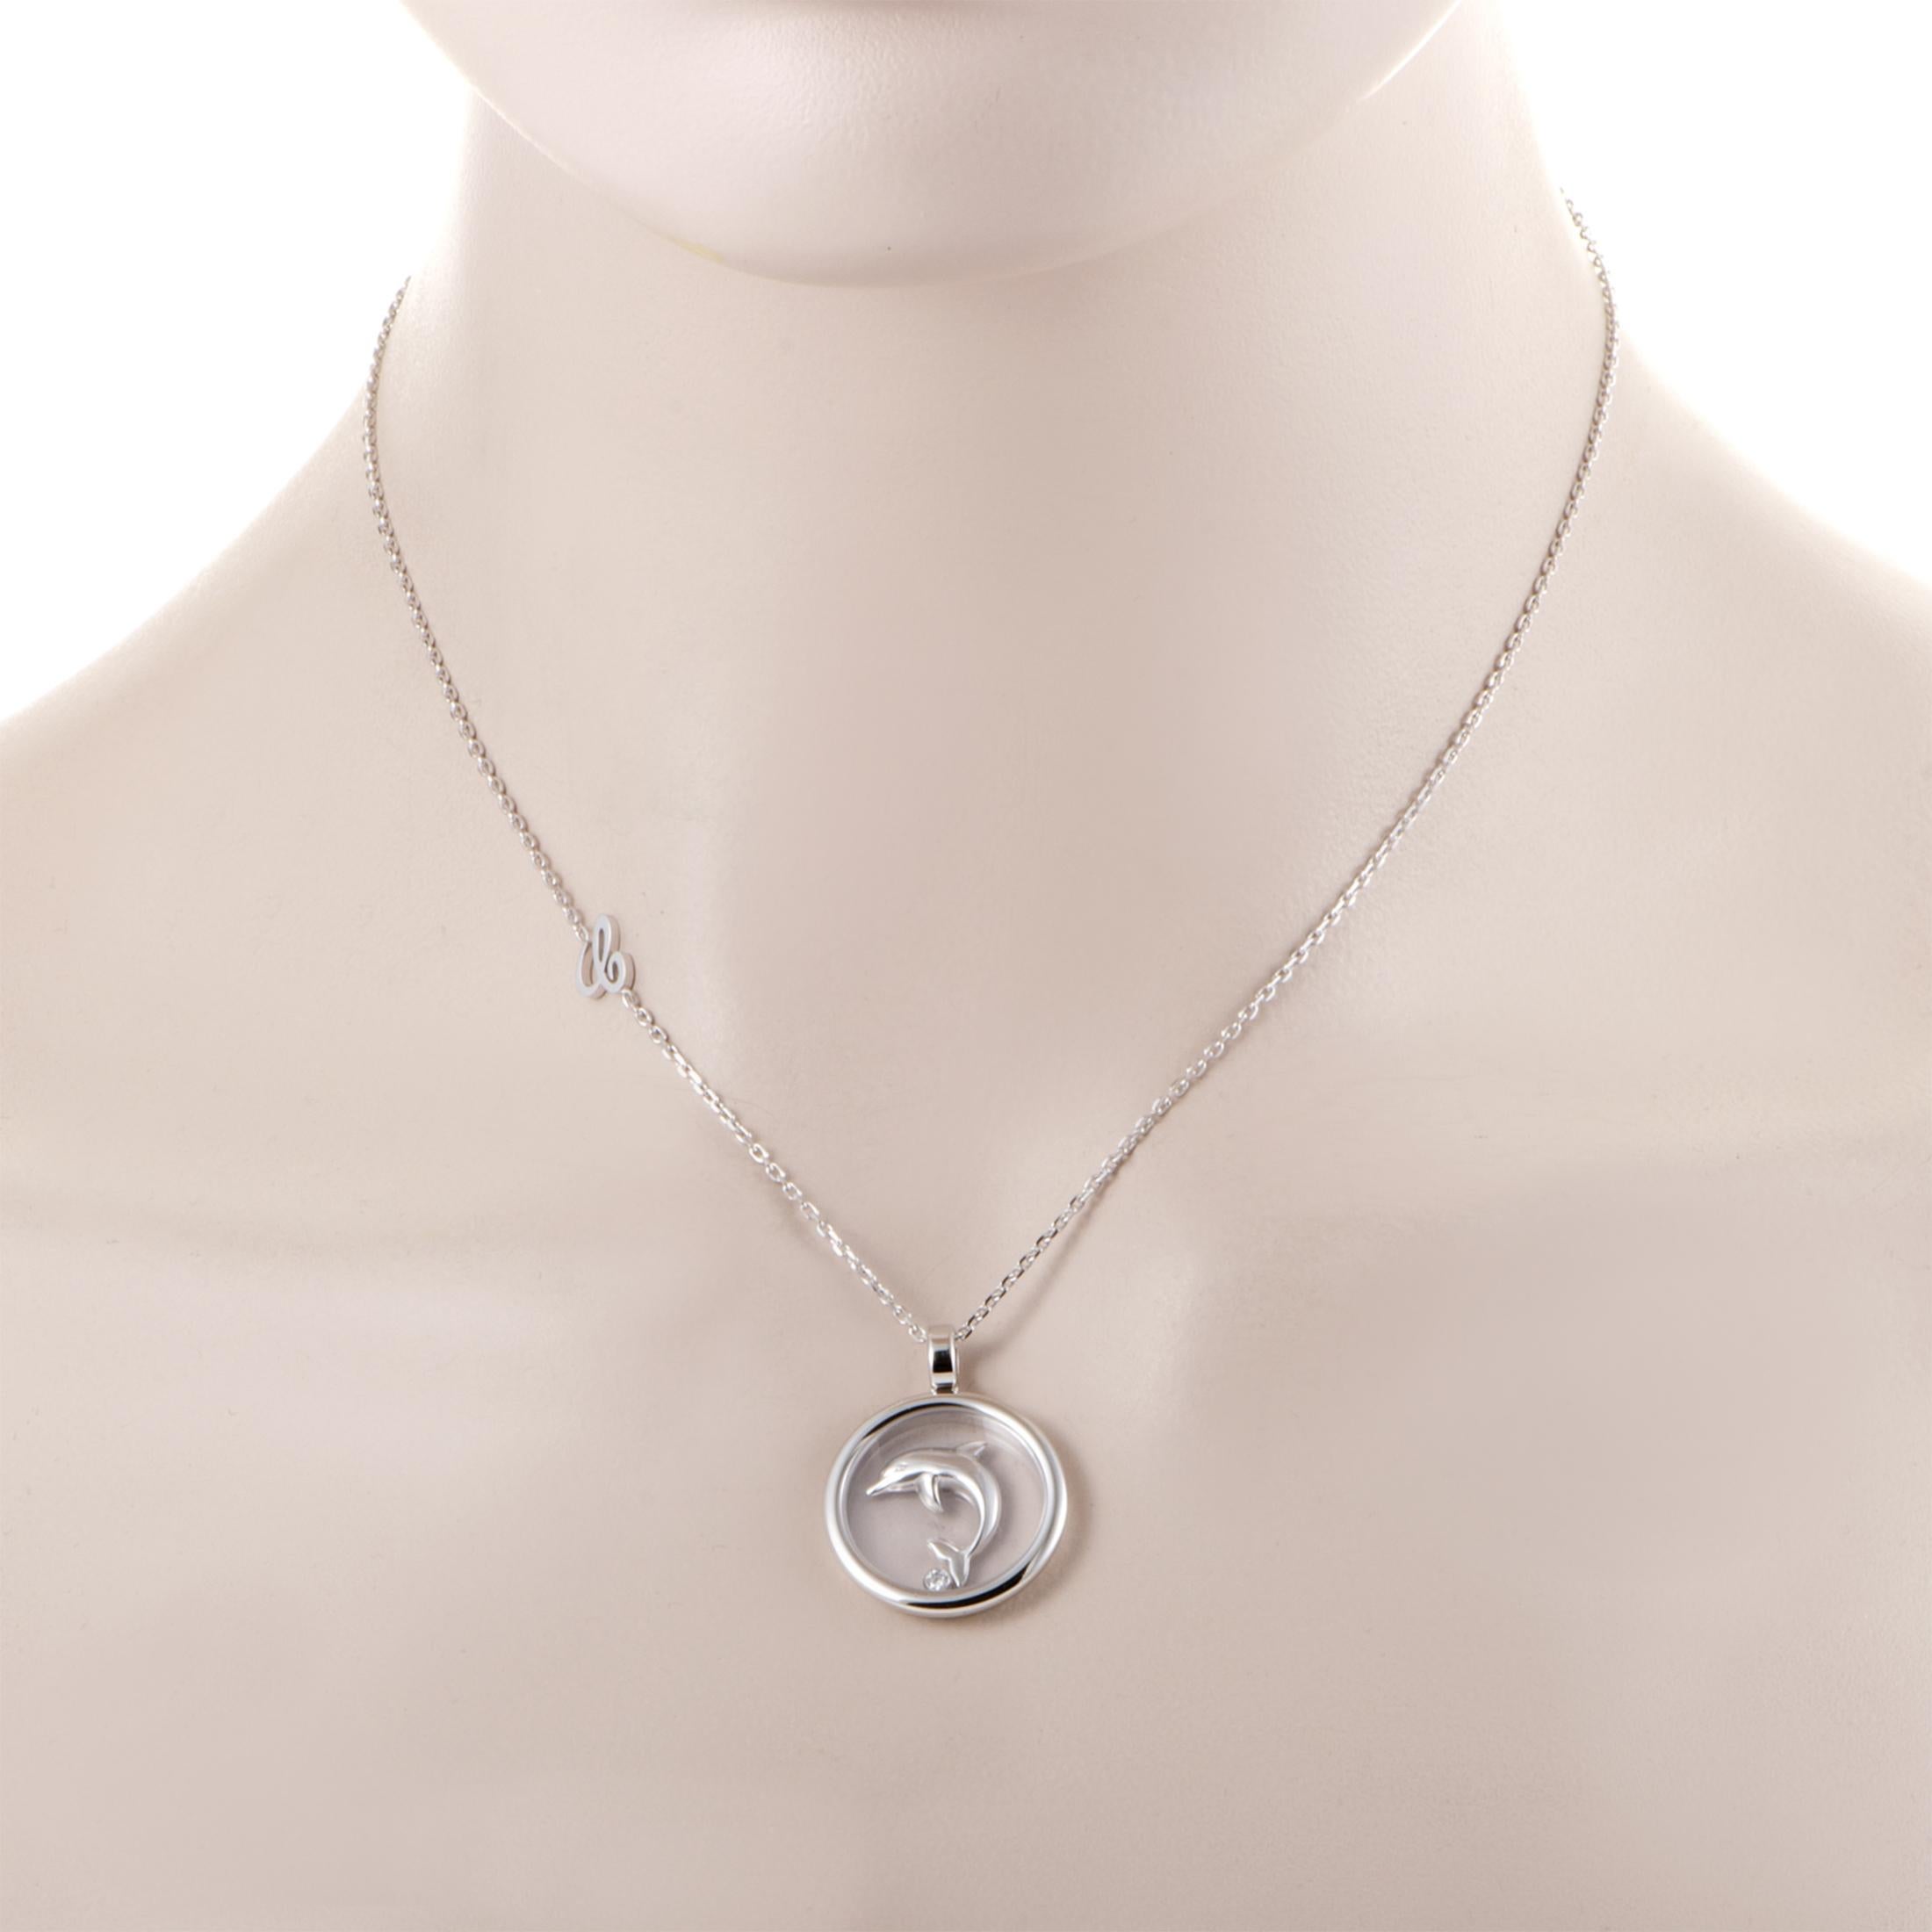 Animal World Dolphin 18K White gold pendant necklace - a fantastic sculpted dolphin in white gold jumps above a single floating diamond in a circle of white gold and is suspended from a beautiful white gold chain with the Chopard 